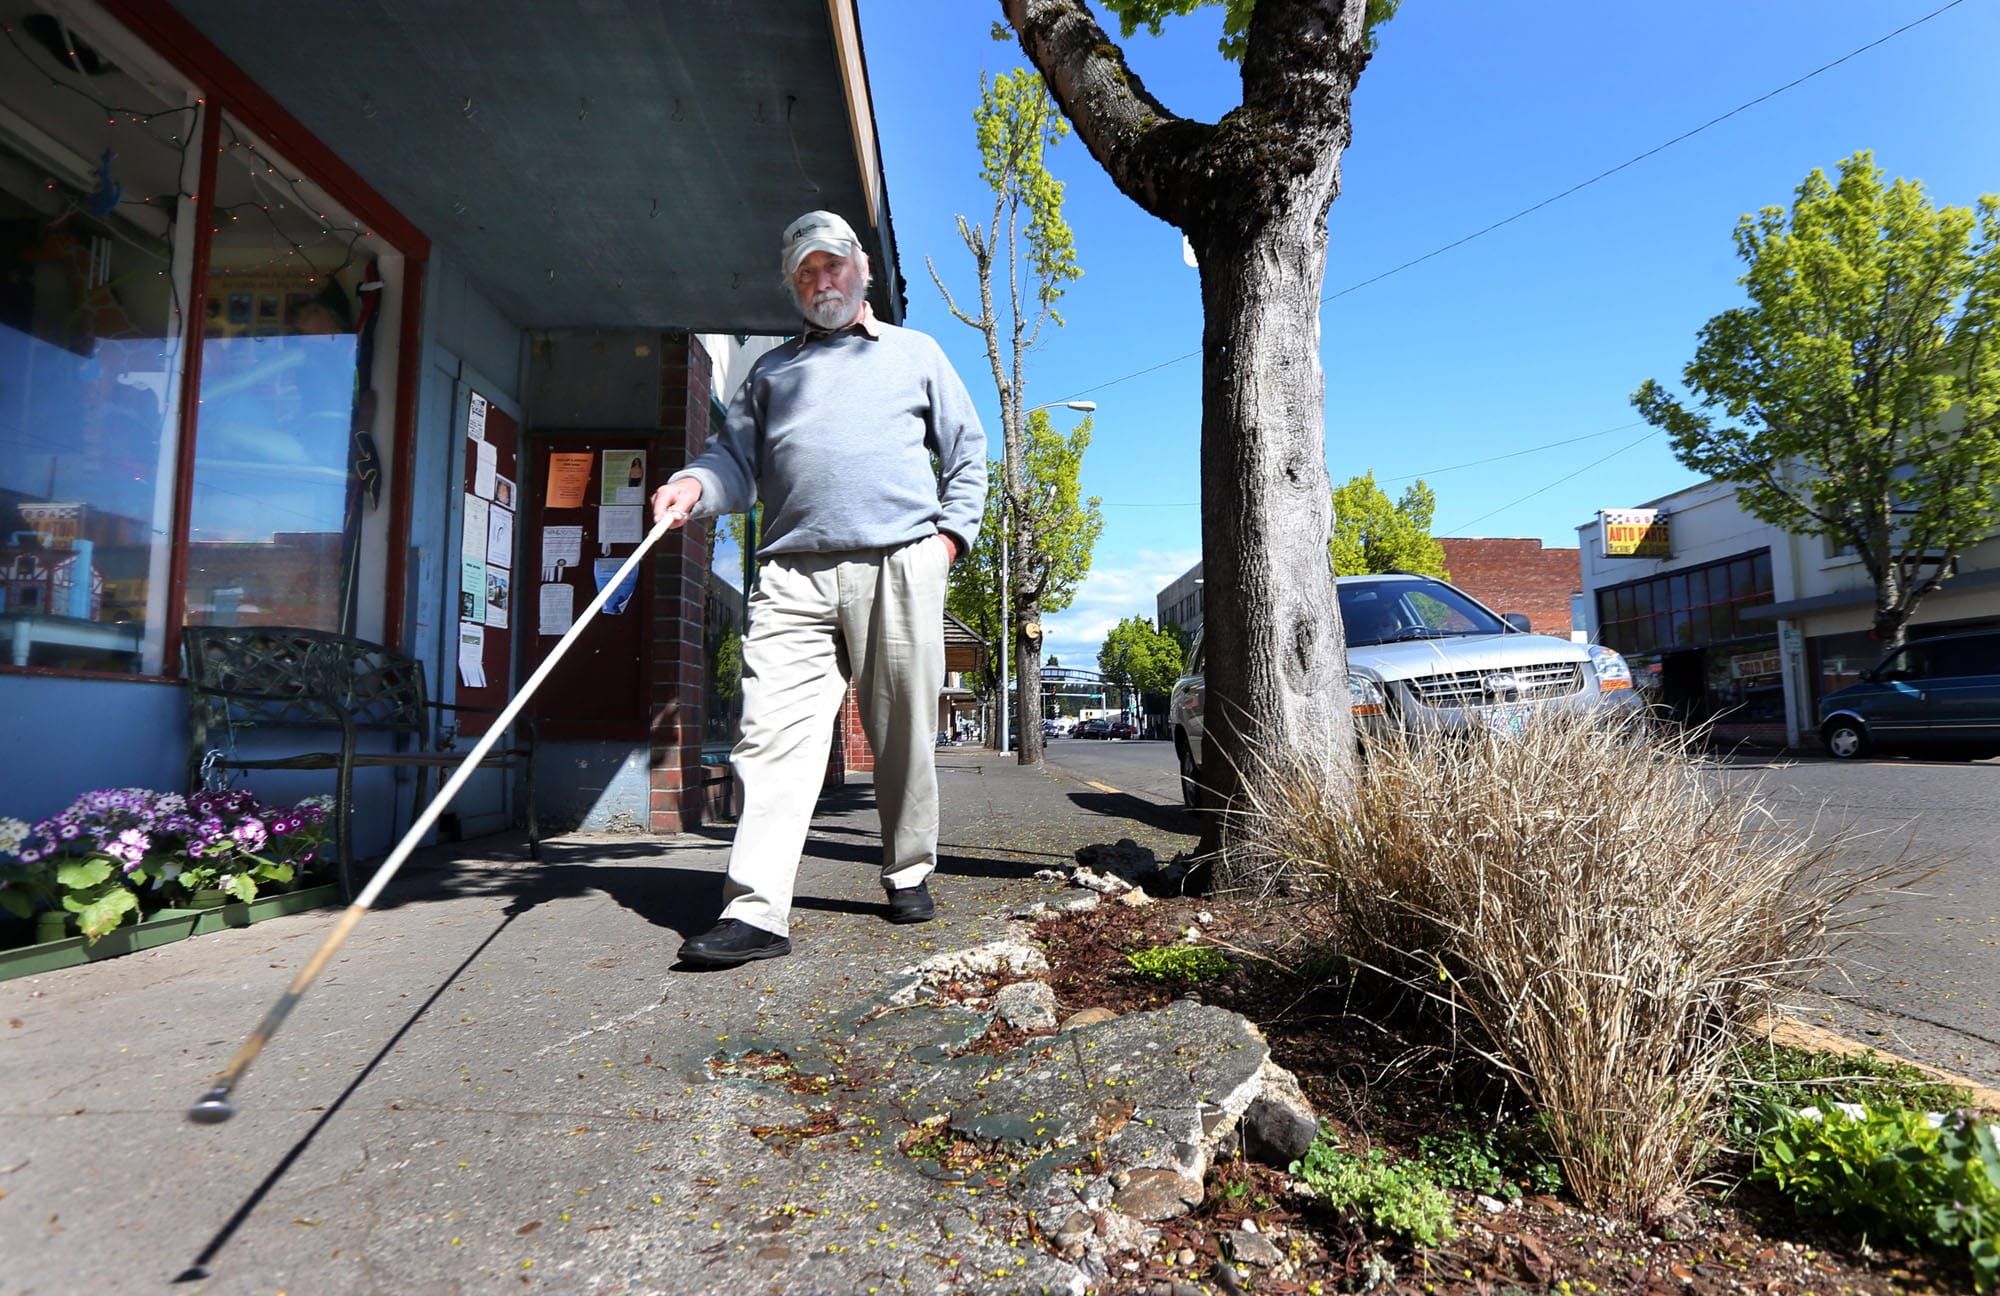 Jim Kness, who has been blind for most of his adult life, navigates his way down Main Street on April 9 in Cottage Grove, Ore.